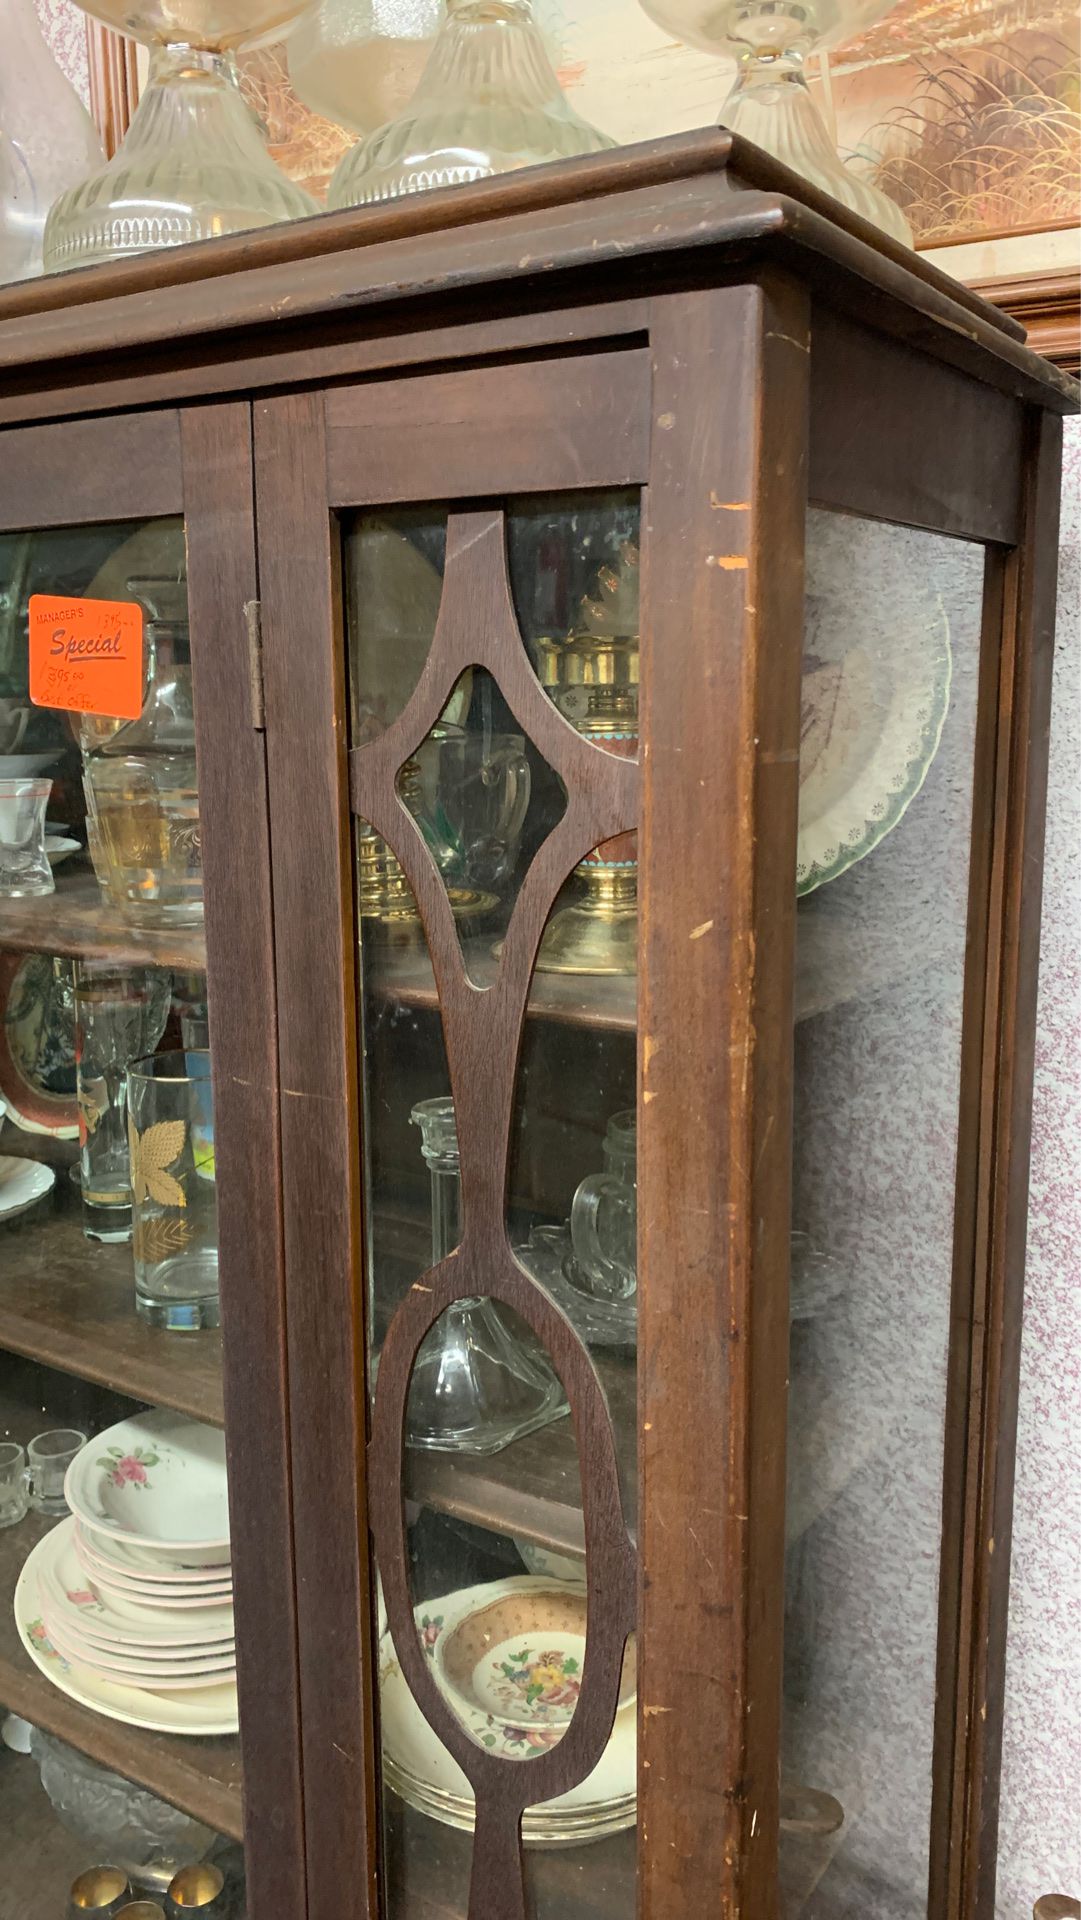 Amazing Fine! Antique China Cabinet! Real wood and original glass and handles!